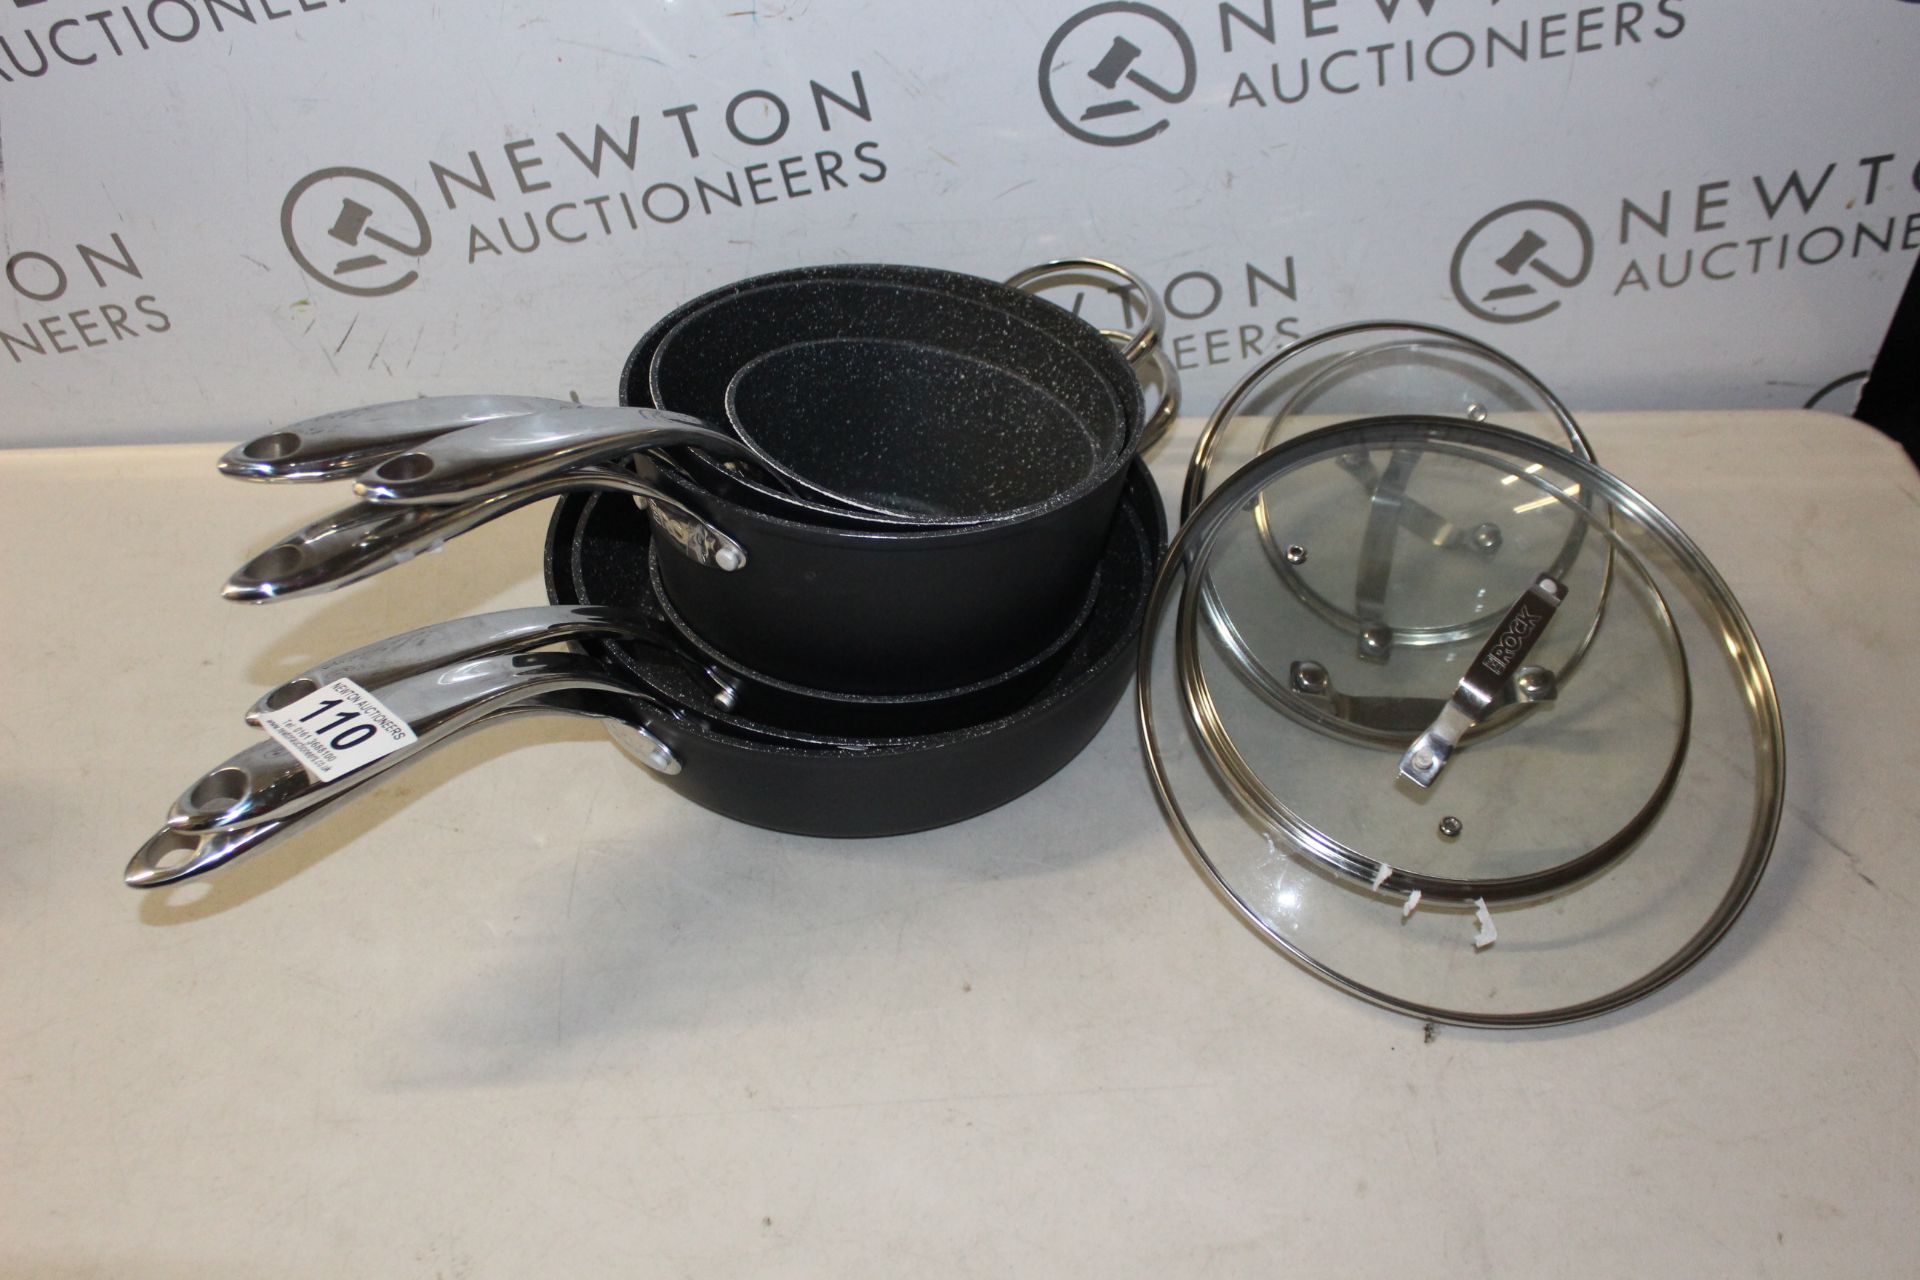 1 STARFRIT THE ROCK 10 PIECE (APPROX) NON-STICK COOKWARE PAN SET RRP Â£149.99 (HEAVILY USED)